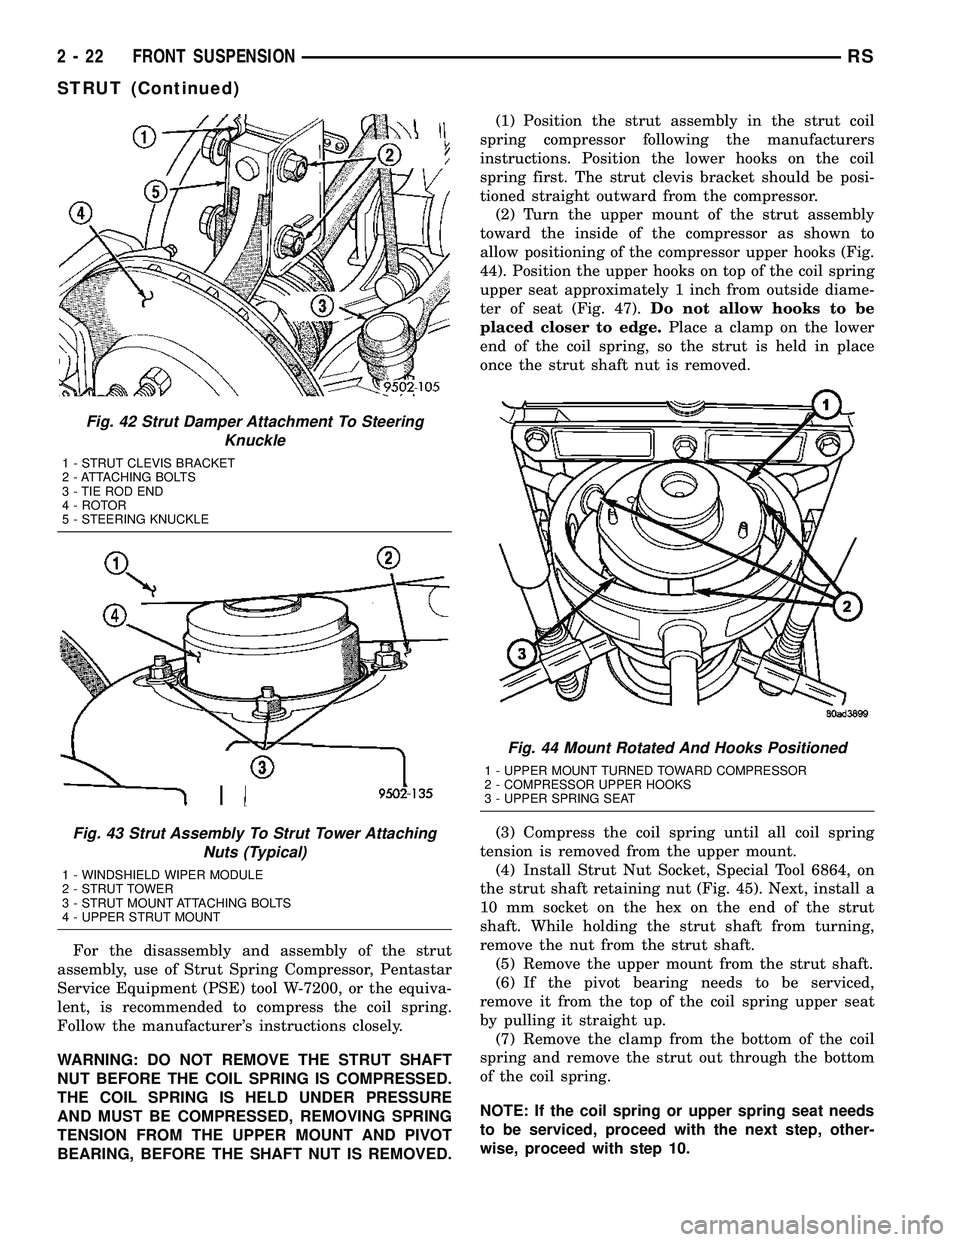 CHRYSLER VOYAGER 2004  Service Manual For the disassembly and assembly of the strut
assembly, use of Strut Spring Compressor, Pentastar
Service Equipment (PSE) tool W-7200, or the equiva-
lent, is recommended to compress the coil spring.
